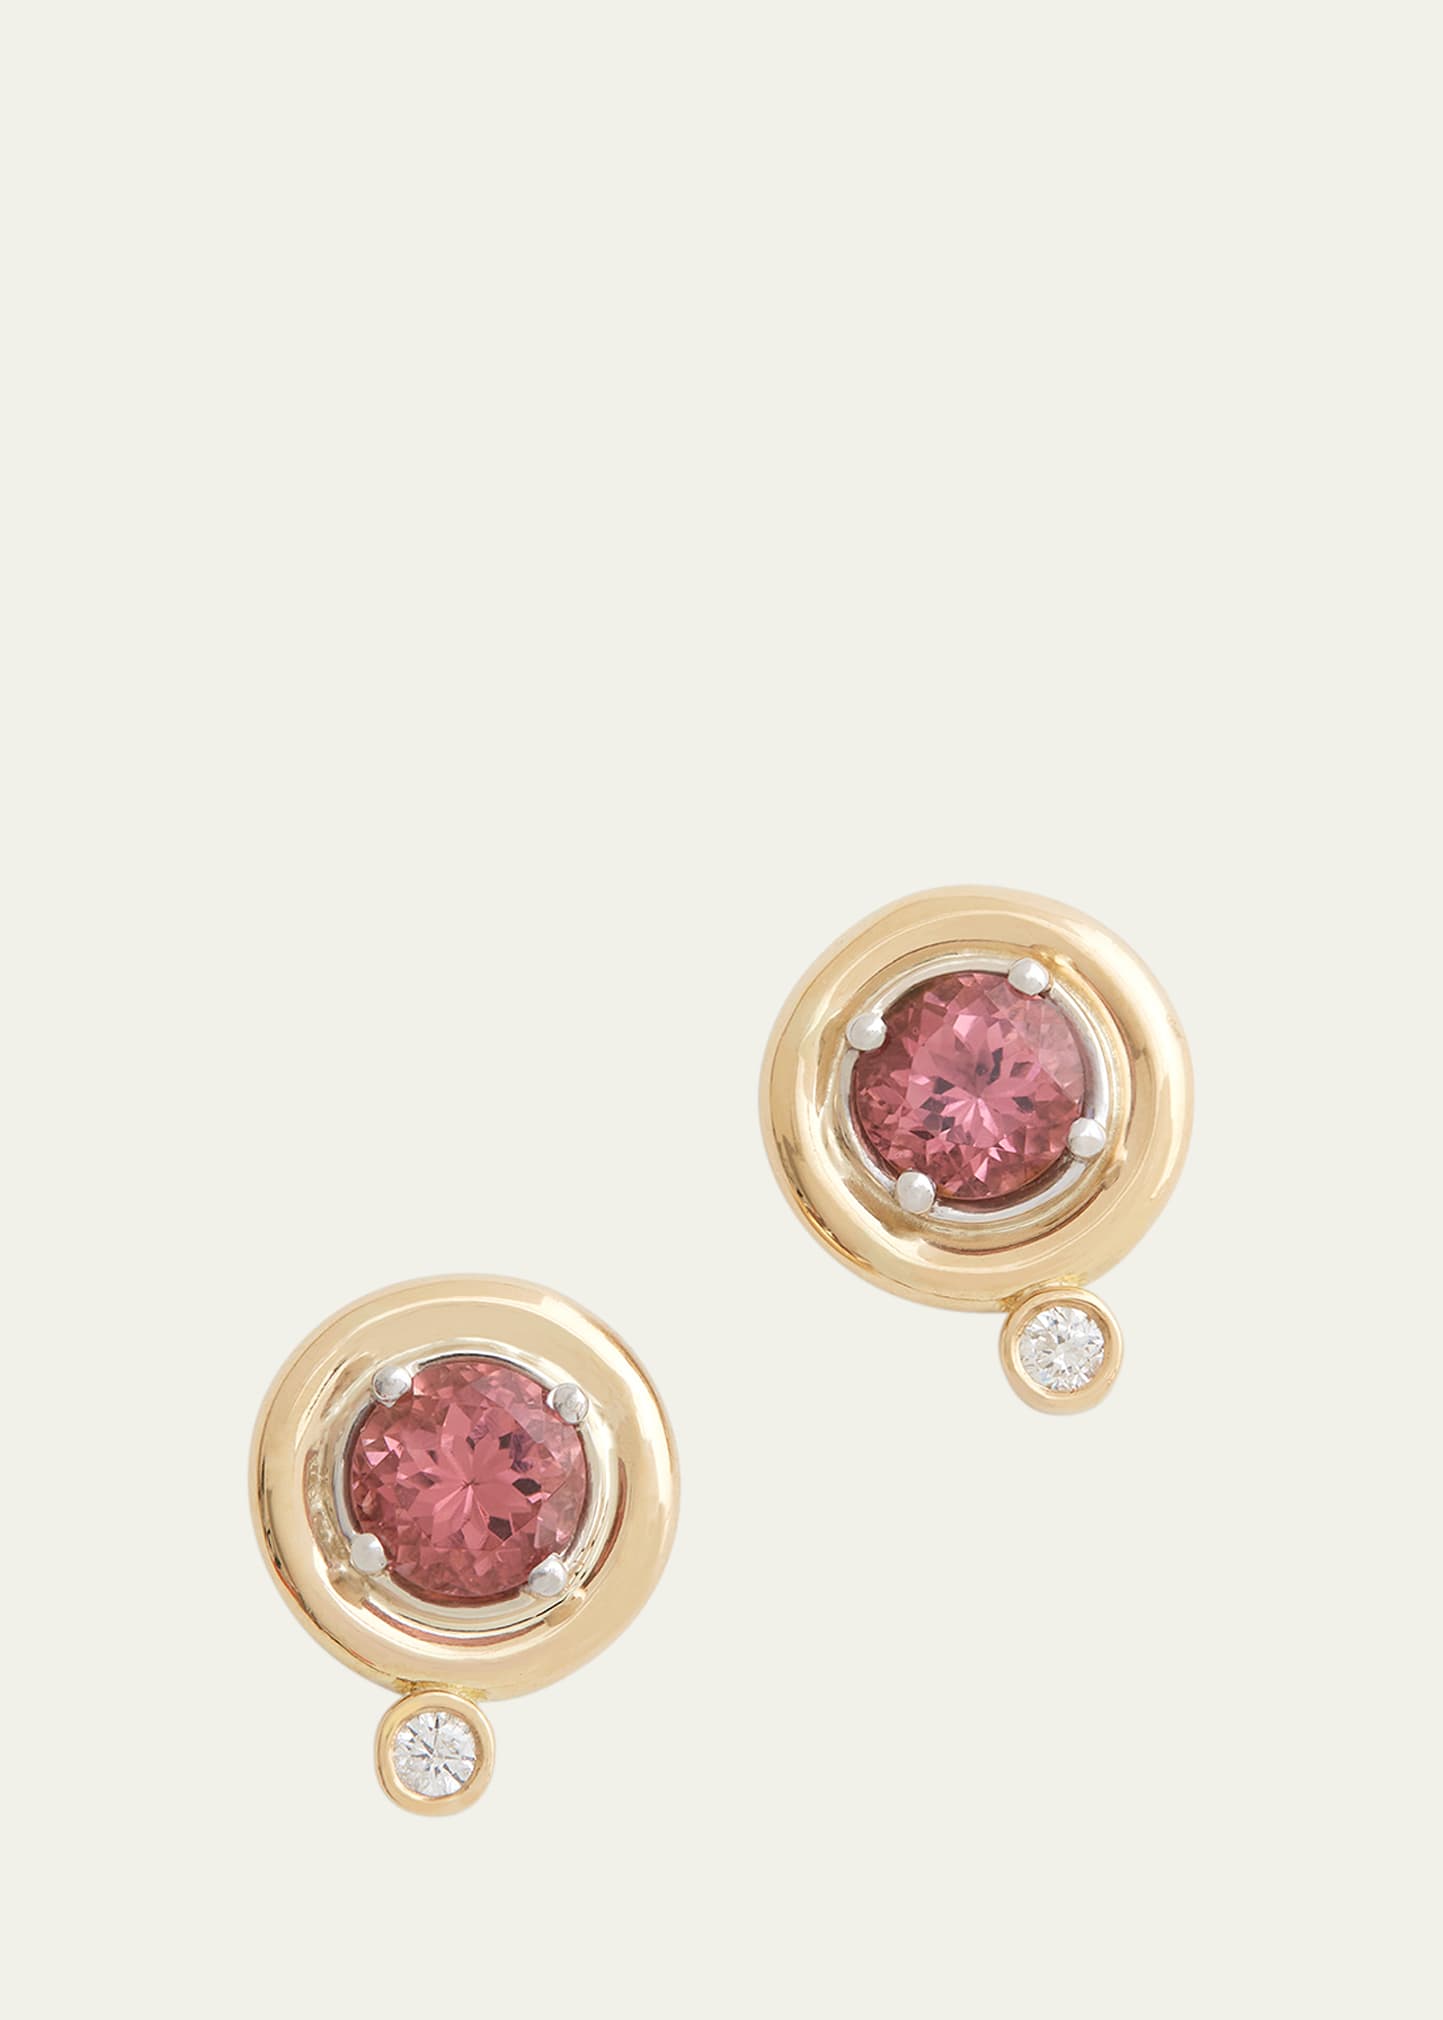 18K Yellow and White Gold Round Stud Earrings with Pink Tourmaline and Diamonds